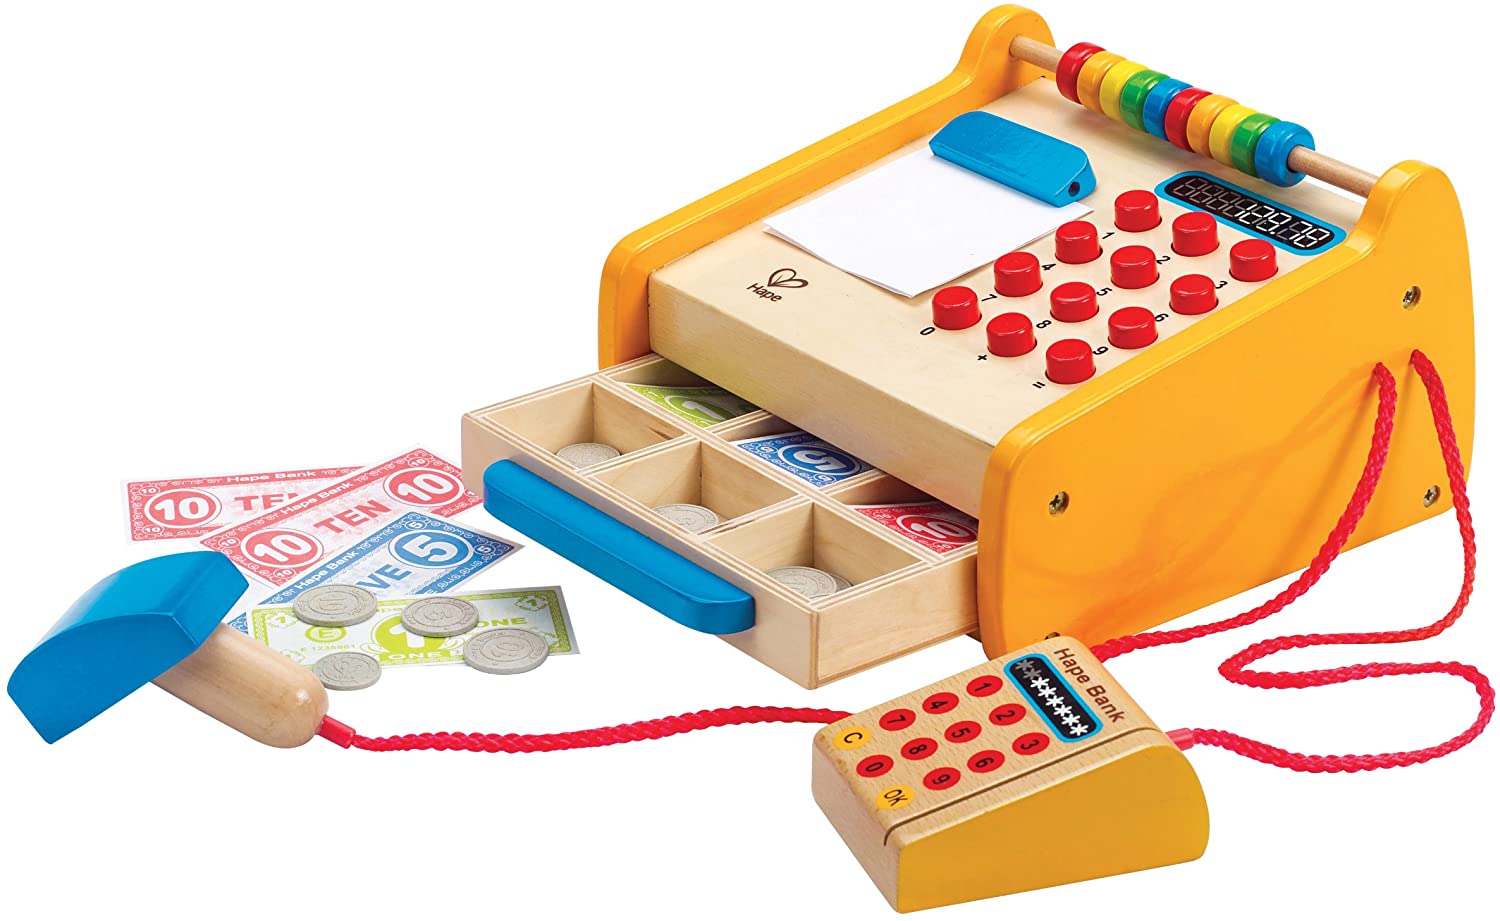 Hape Checkout Register Kid's Wooden Pretend Play Set Yellow, L: 7.6, W: 7.9, H: 4.8 inch